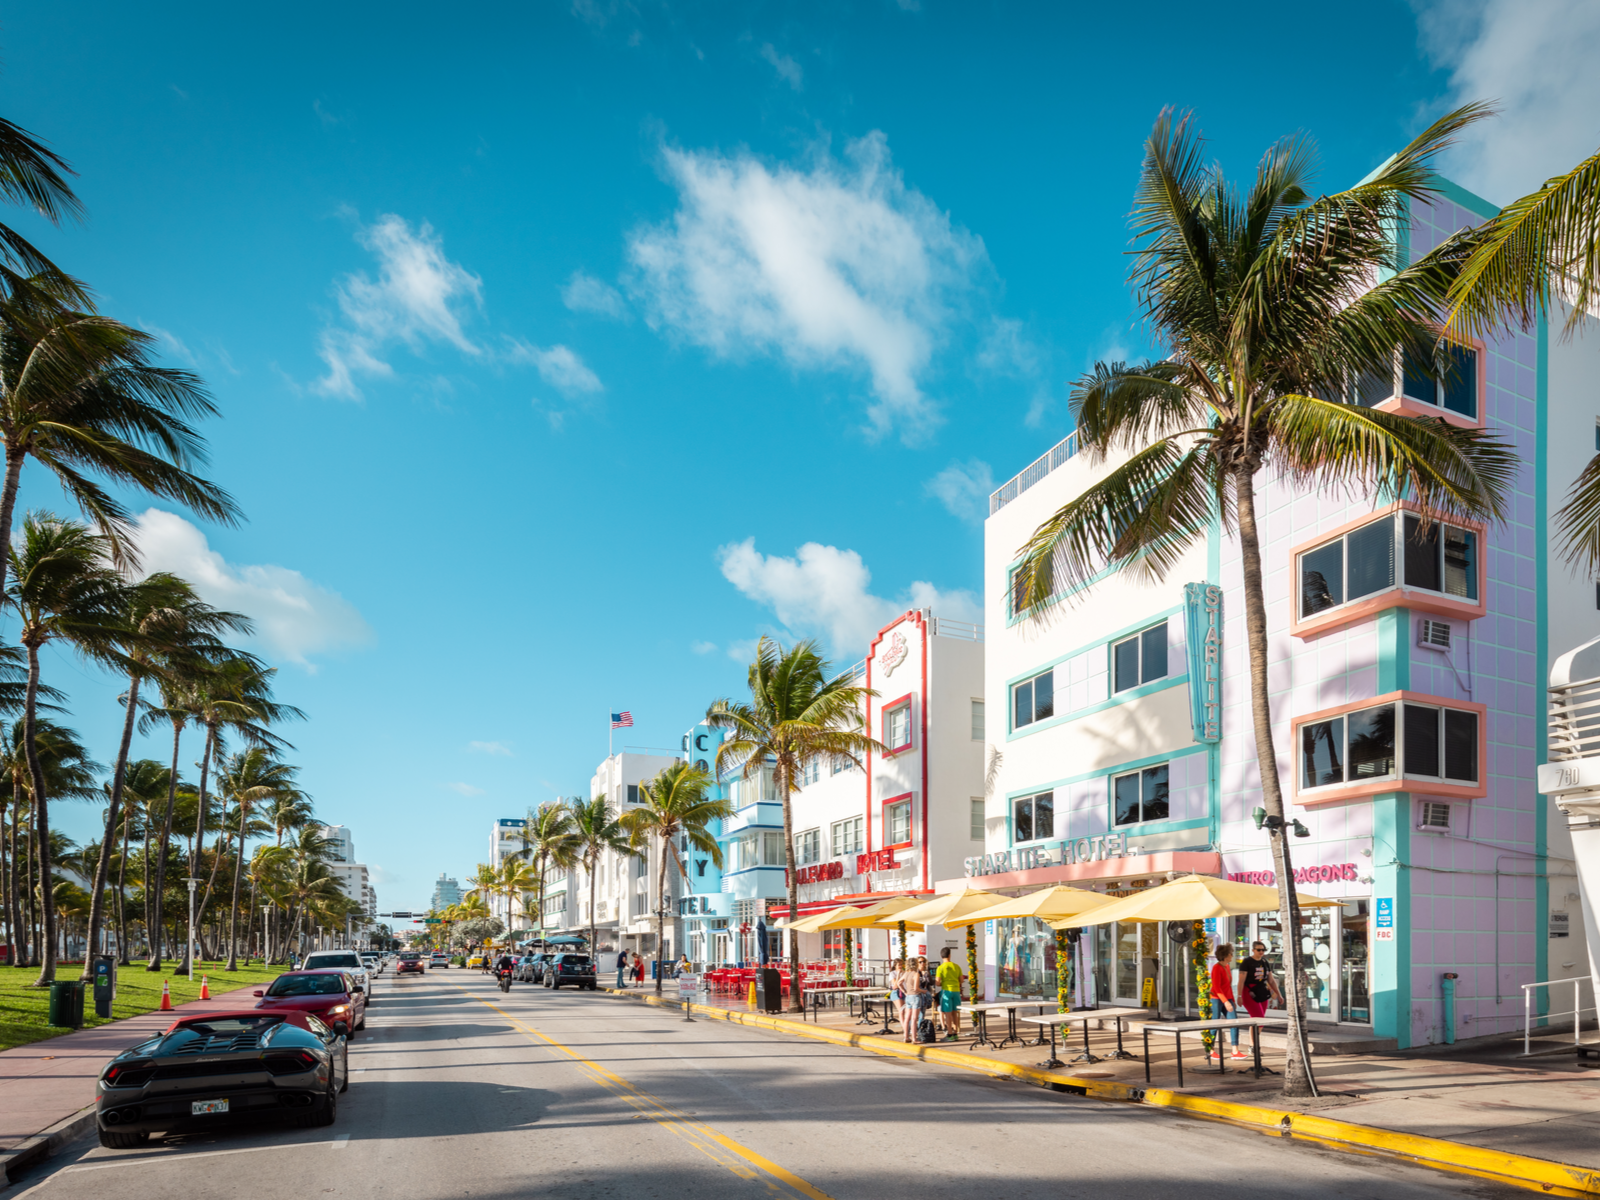 Ocean Drive in the daytime pictured during the best time to go to Miami when it has warm weather and clear skies